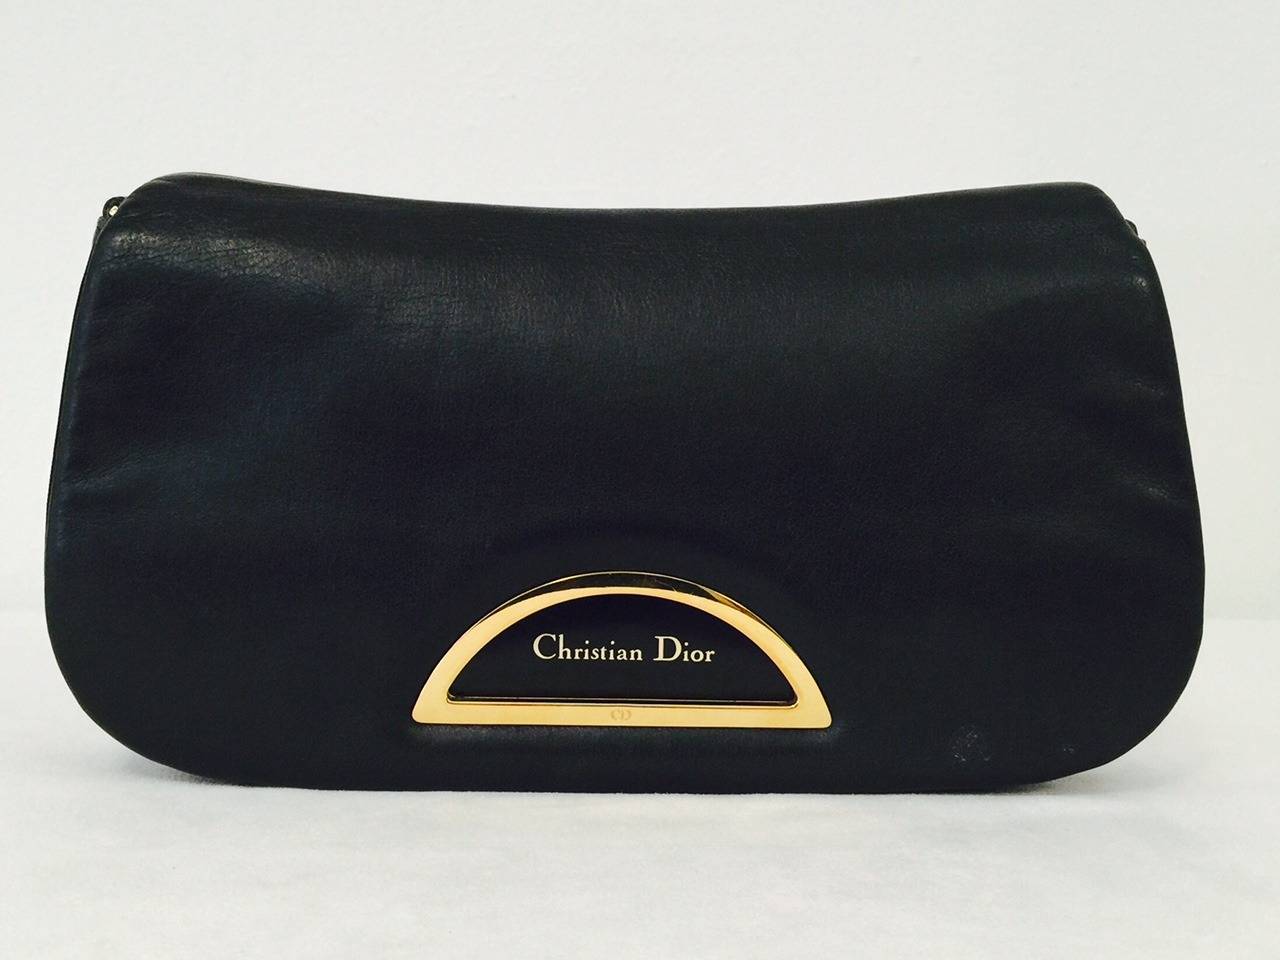 Christian Dior Shoulder Bag is quintessentially feminine and chic!  Features butter soft lambskin leather, gold tone hardware, adjustable strap, and magnetic closure!  Fully lined in luxurious black fabric.  Interior features one zippered flat